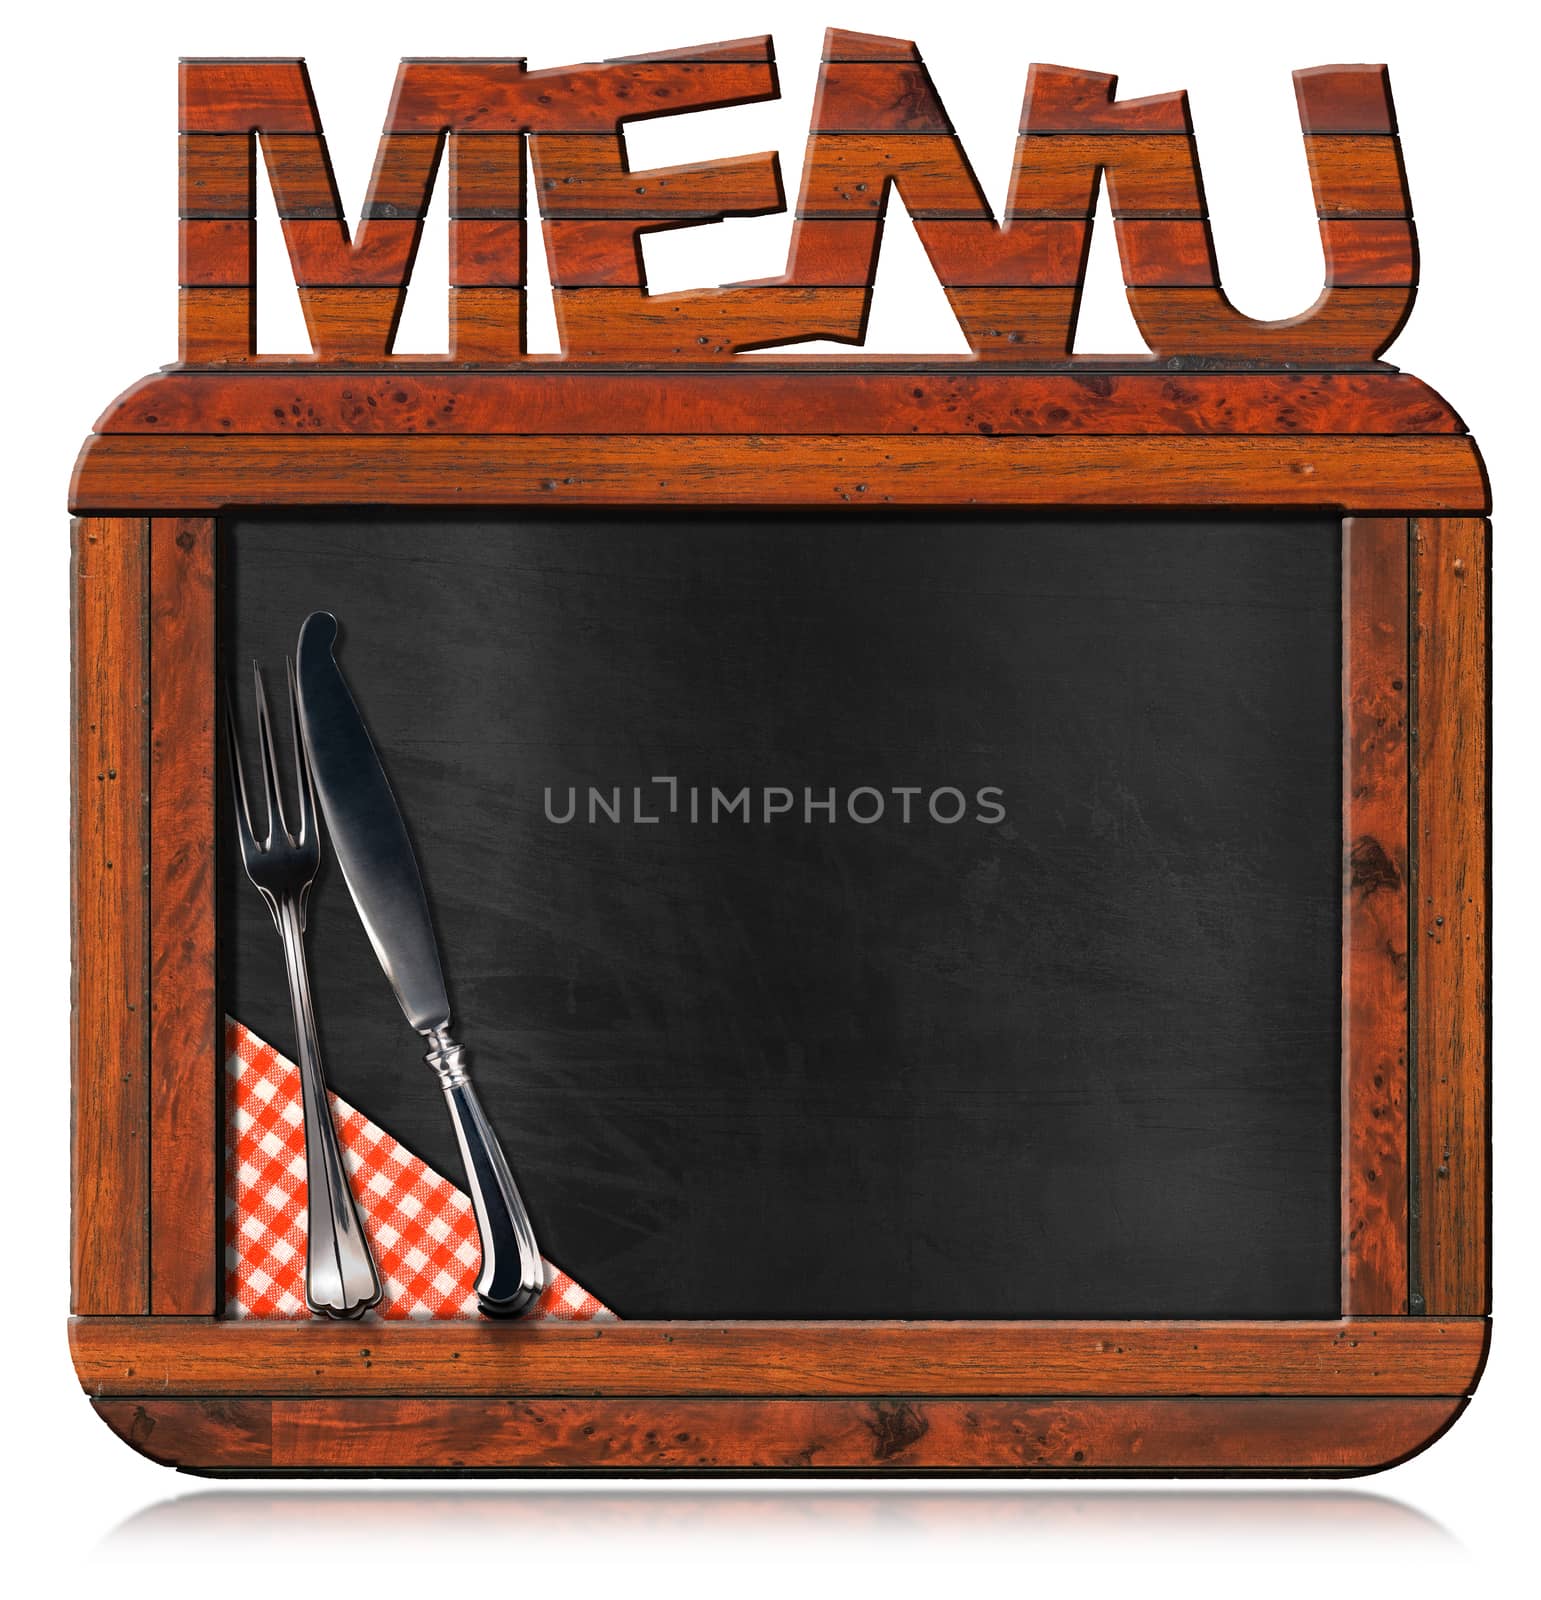 Old empty blackboard with wooden rectangular frame with text menu, silver cutlery and checkered tablecloth. Template for recipes or food menu